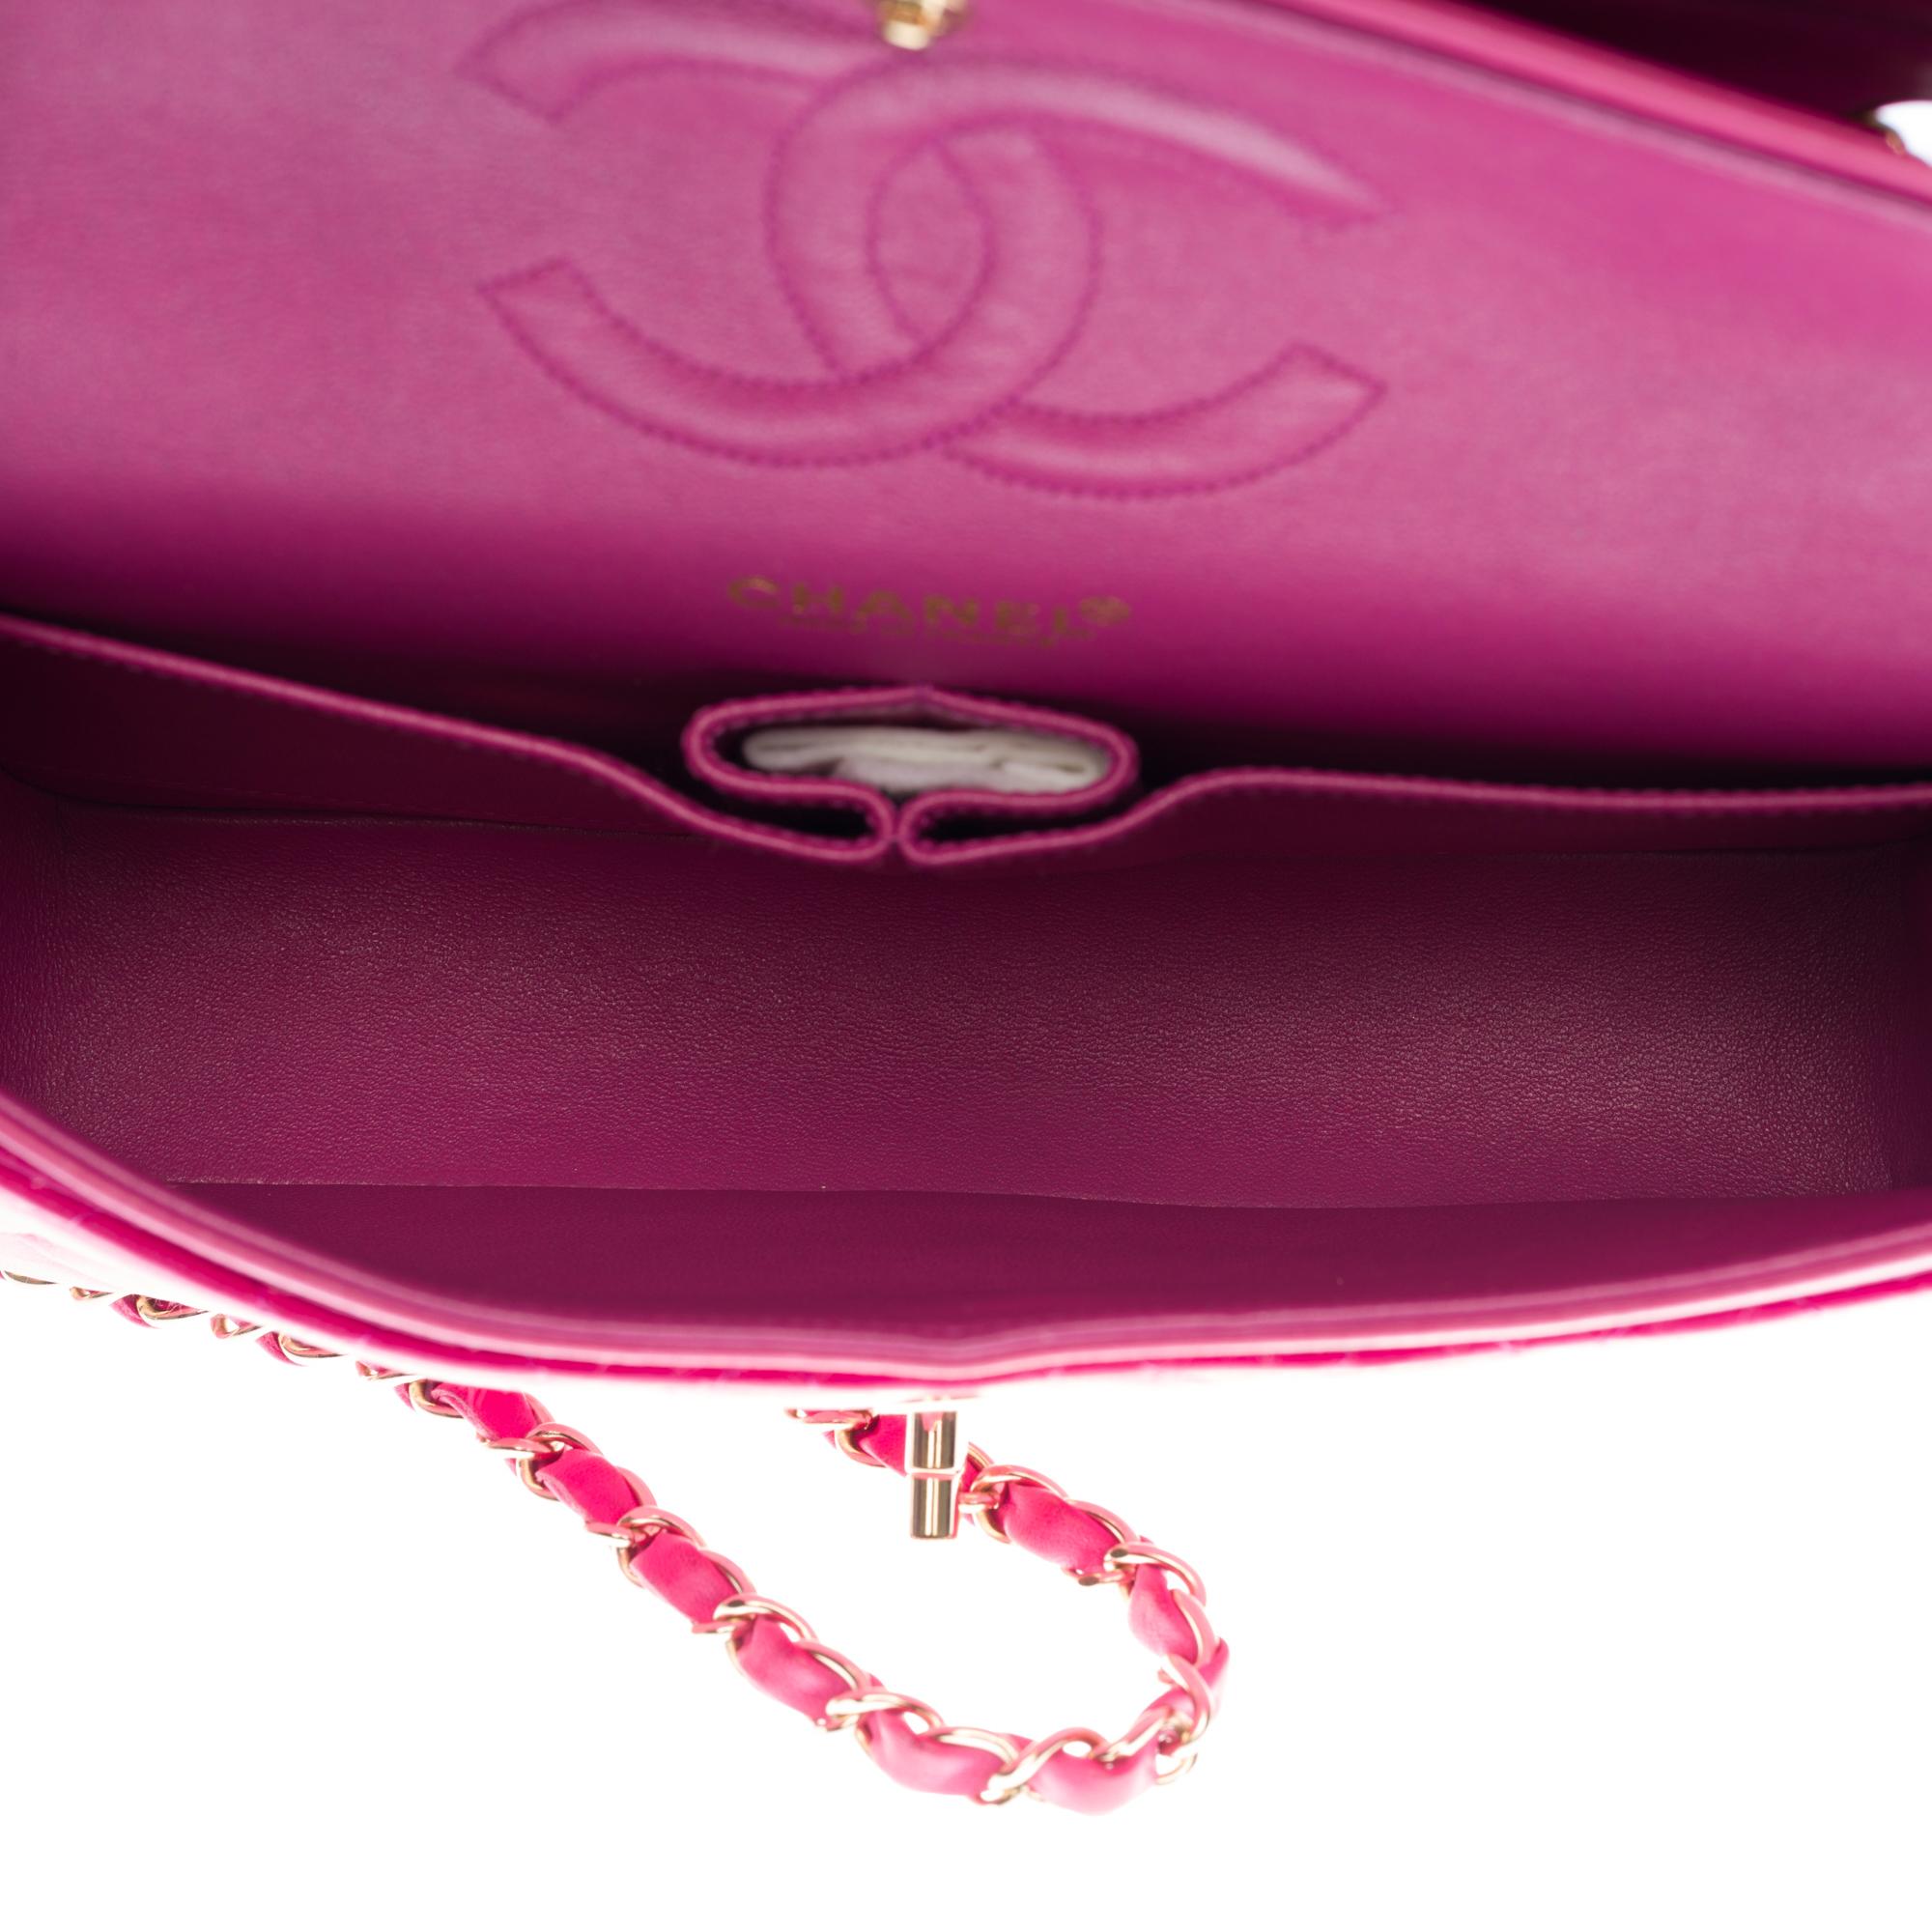 Women's Chanel Timeless Medium double flap Shoulder bag in Pink quilted lambskin, SHW